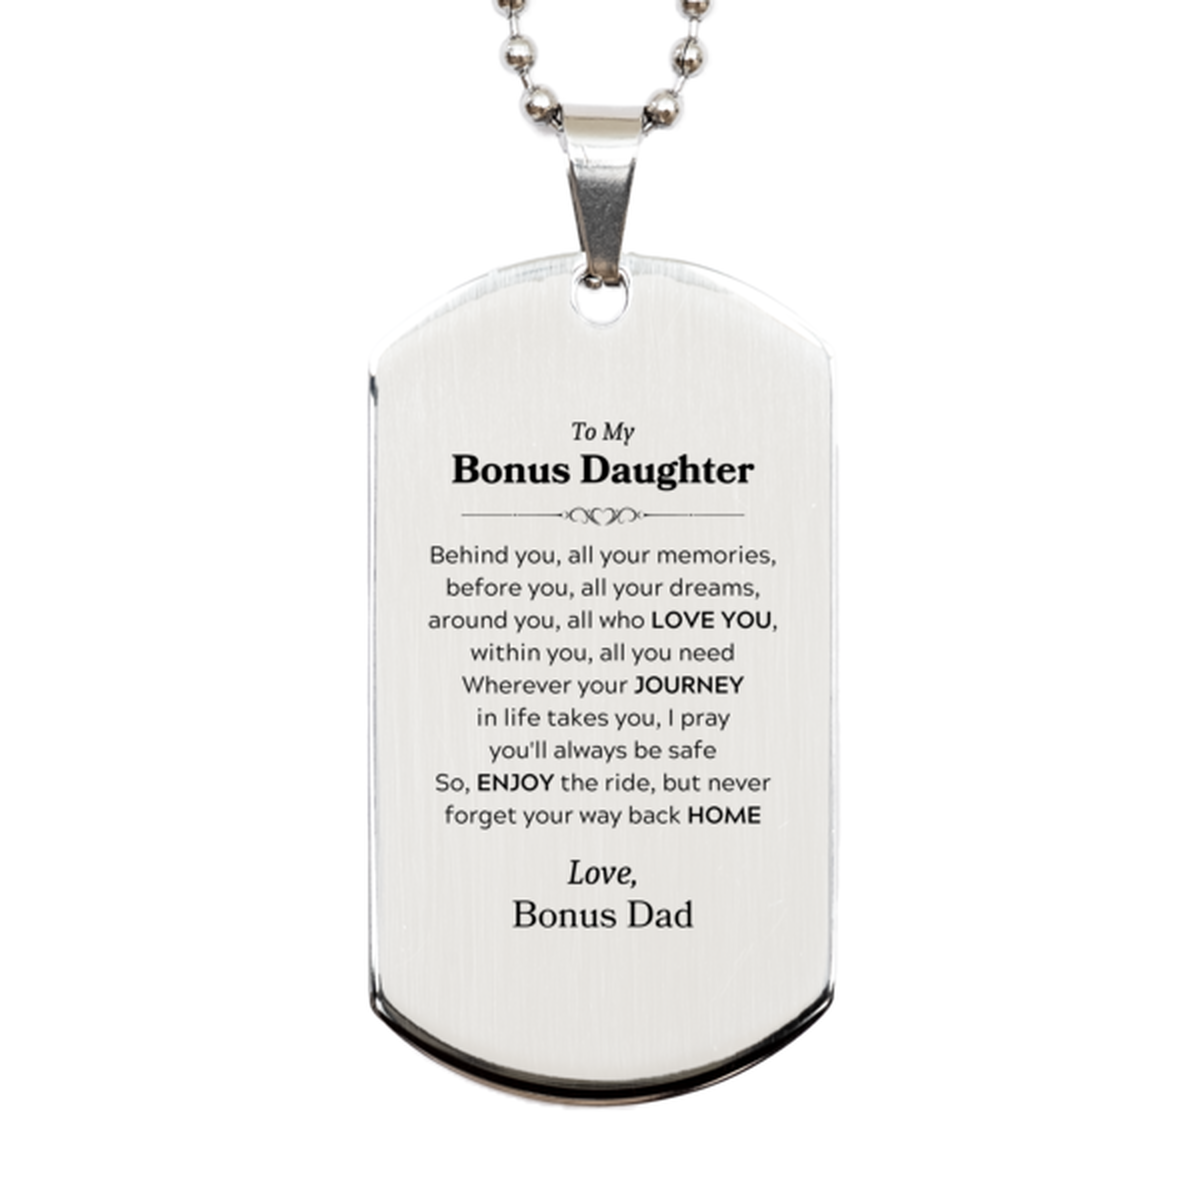 To My Bonus Daughter Graduation Gifts from Bonus Dad, Bonus Daughter Silver Dog Tag Christmas Birthday Gifts for Bonus Daughter Behind you, all your memories, before you, all your dreams. Love, Bonus Dad